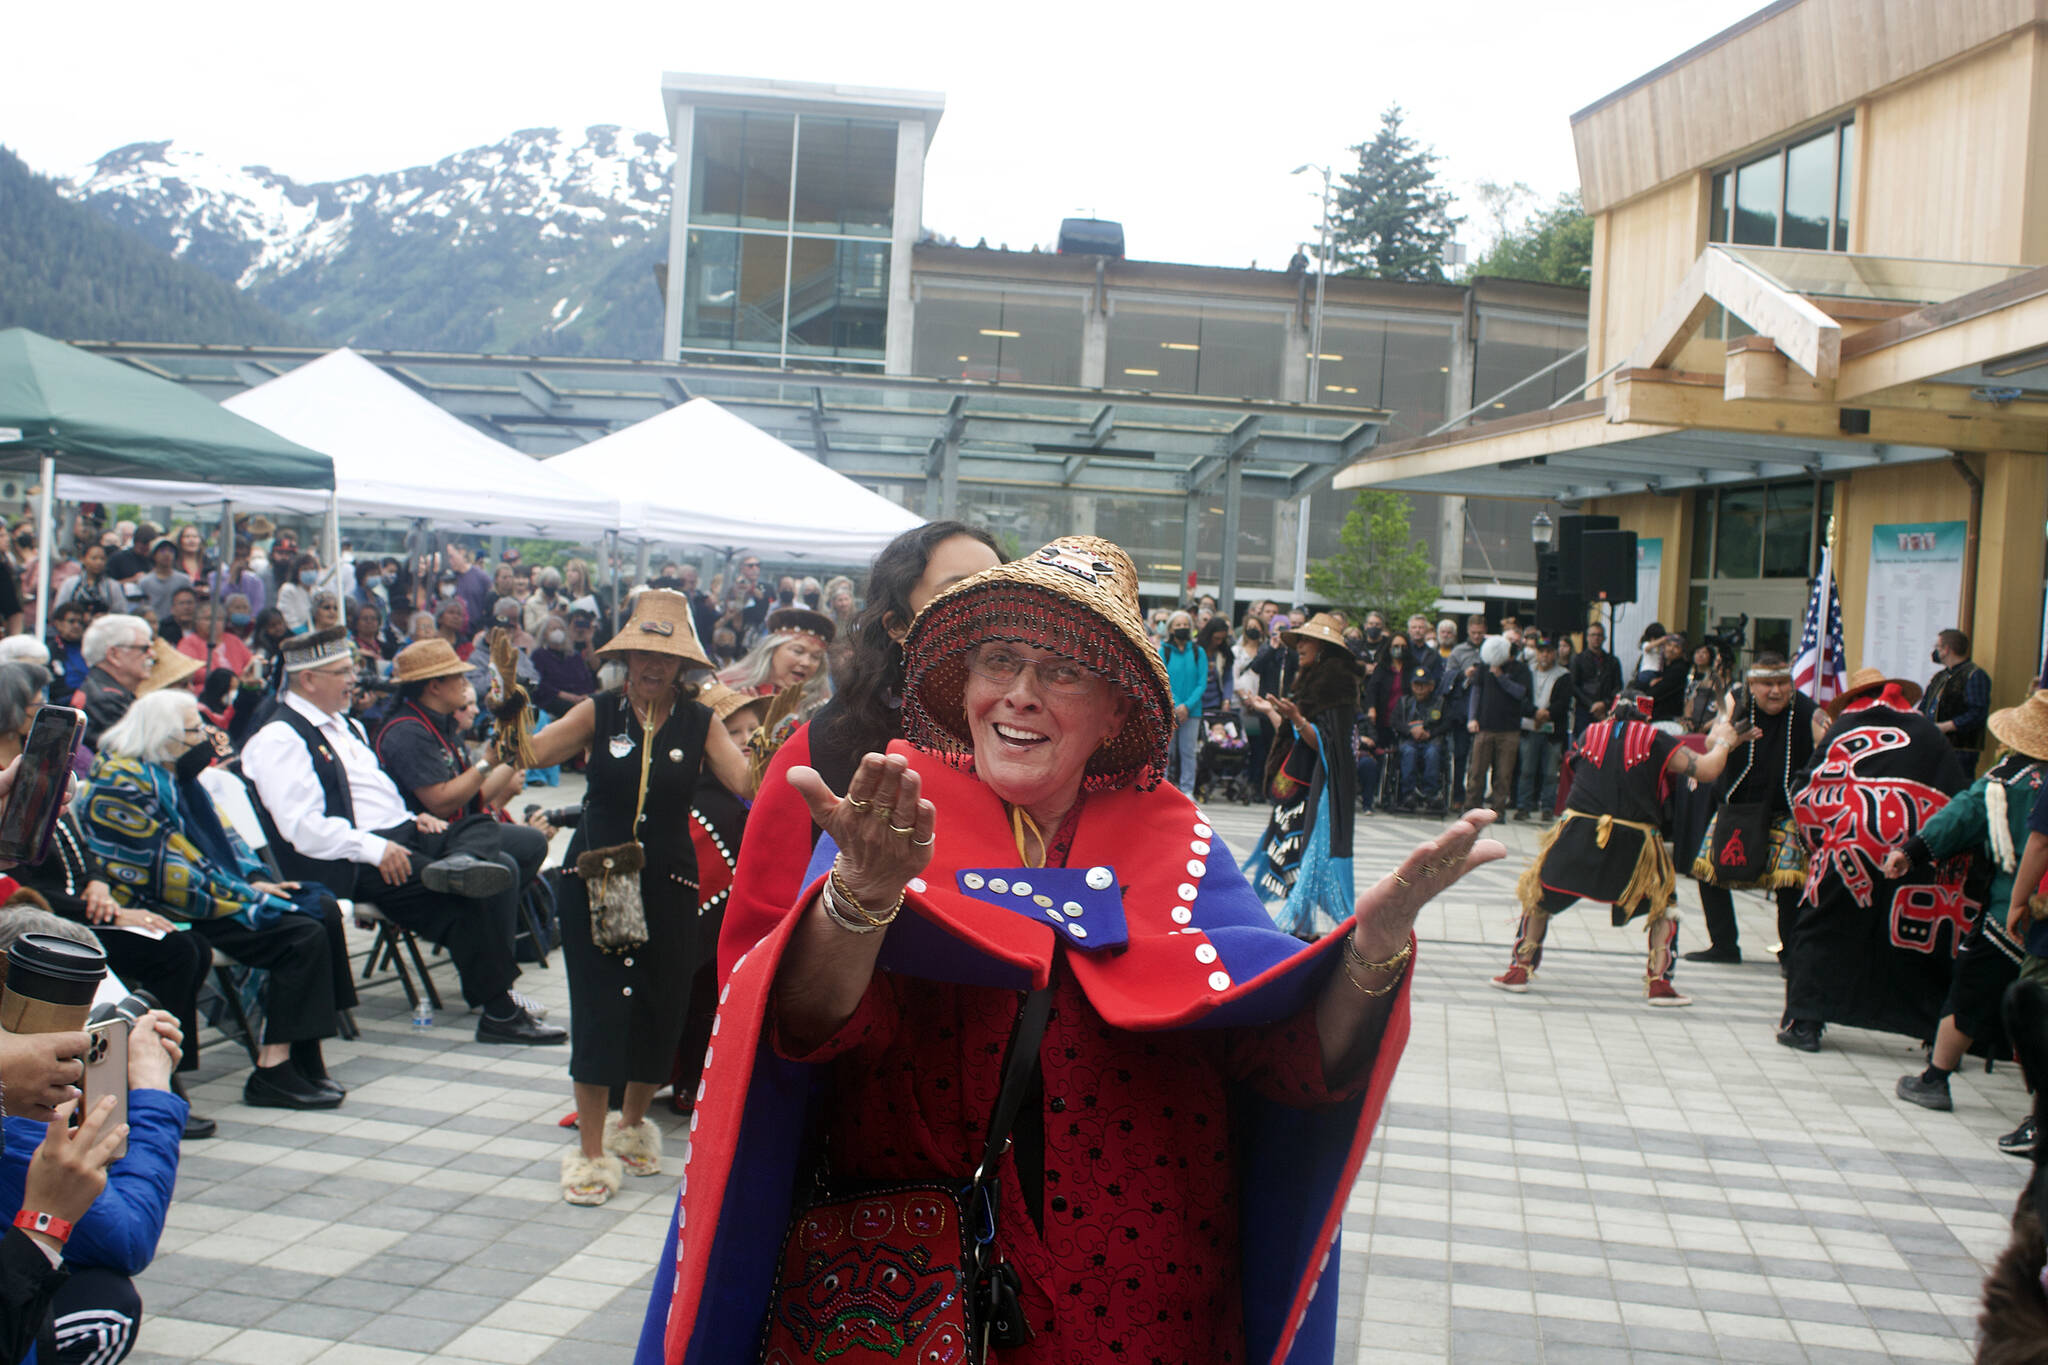 Fran Houston, cultural Leader of the A’akw Kwáan, dances during Celebration in downtown Juneau. Wednesday, the biennial celebration of Alaska Native peoples and cultures brought song, dance and the opening of a new arts campus to the capital city. (Mark Sabbatini / Juneau Empire)